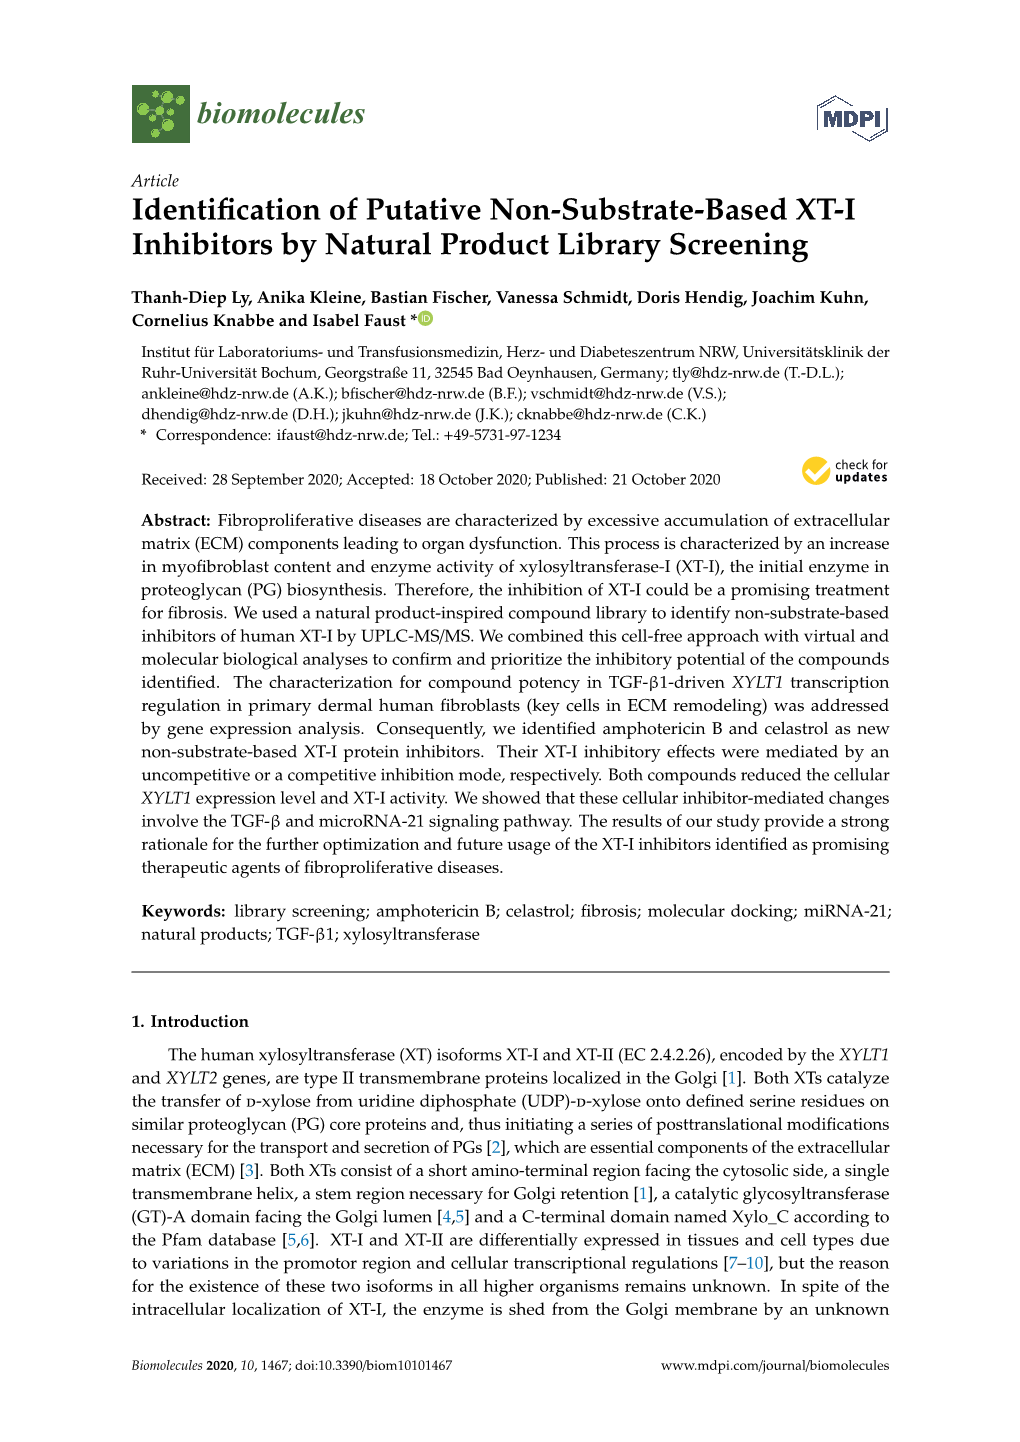 Identification of Putative Non-Substrate-Based XT-I Inhibitors by Natural Product Library Screening